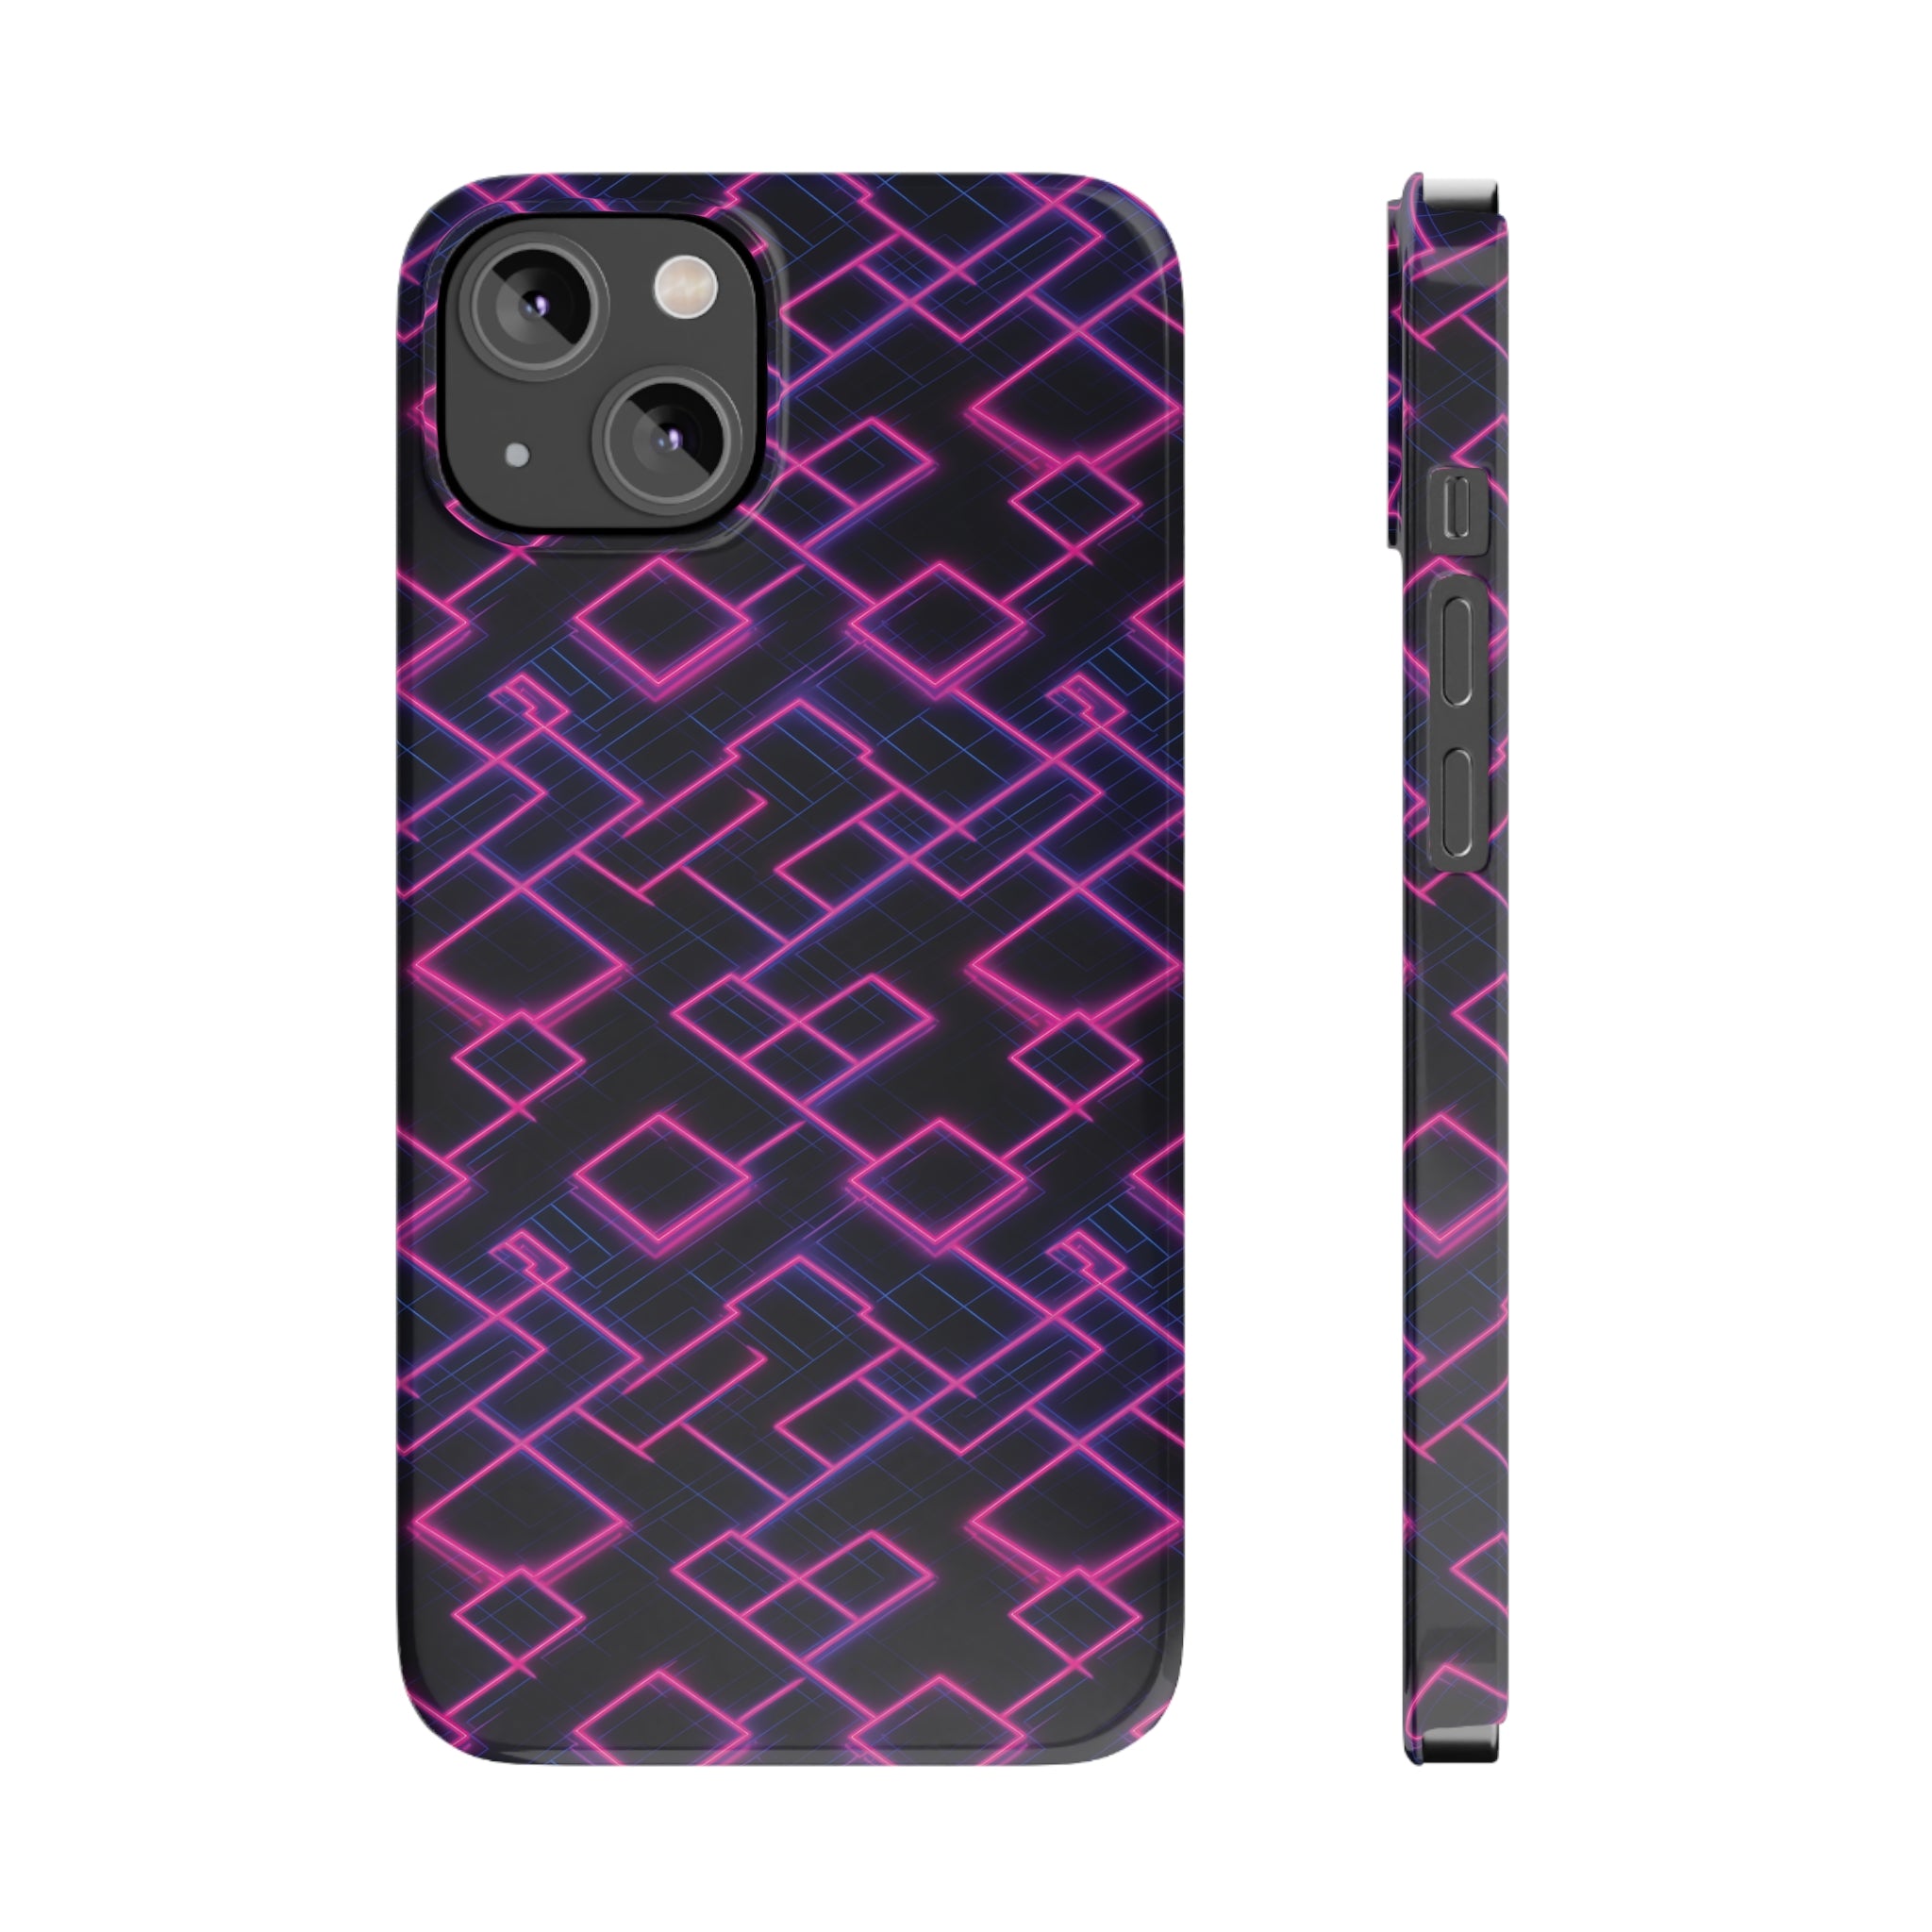 Slim Phone Cases (AOP) - Seamless Synthwave Designs 01